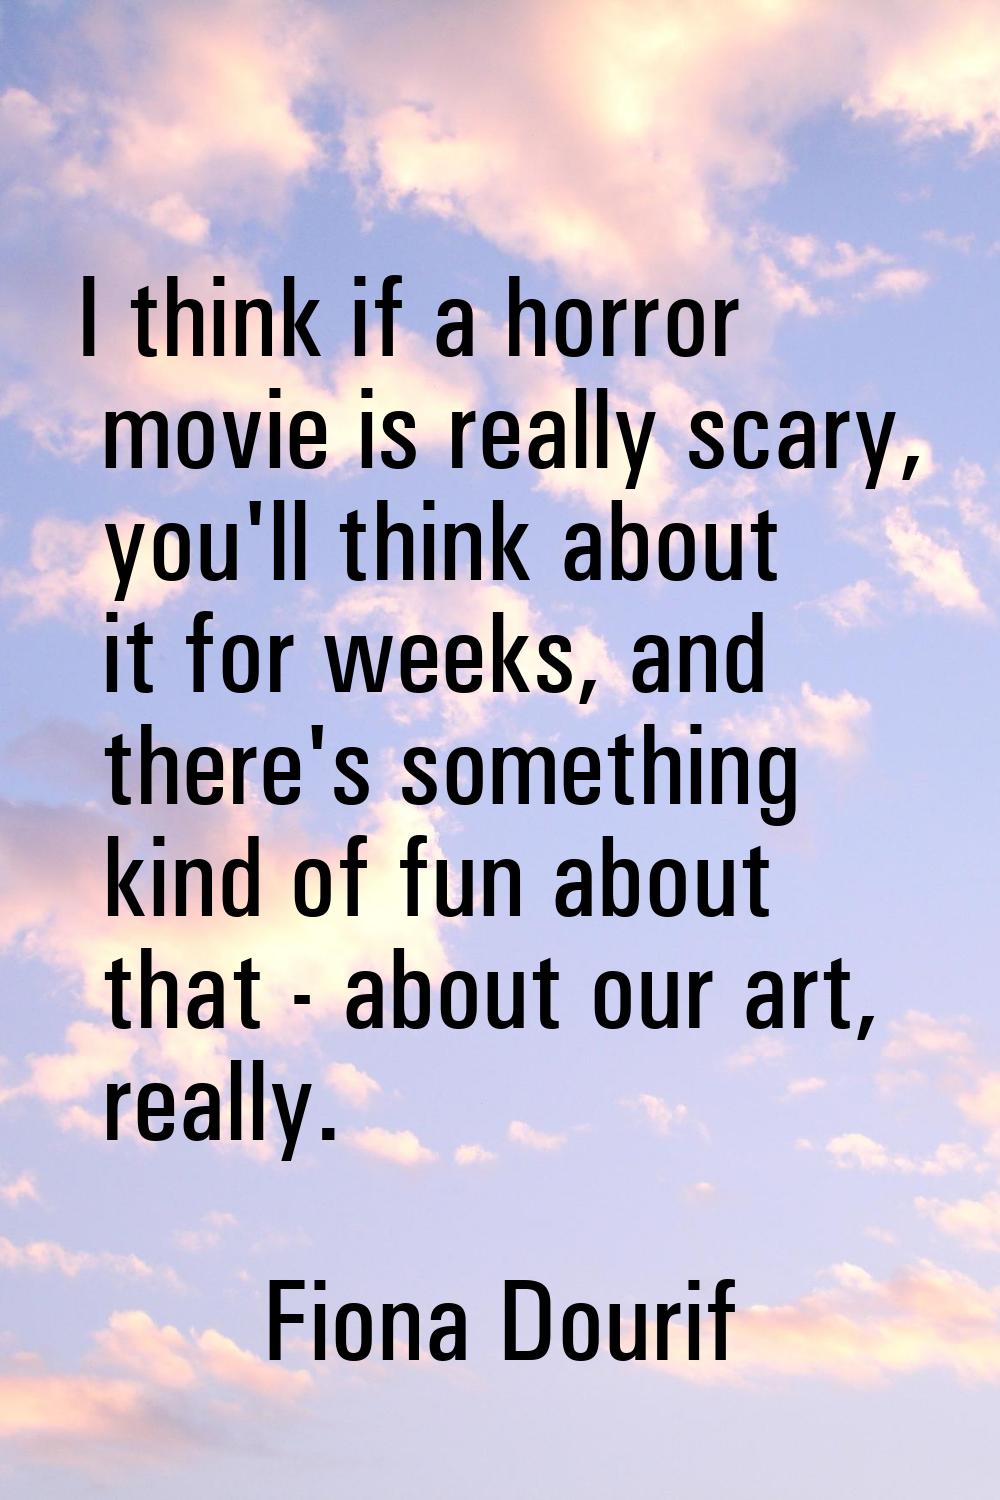 I think if a horror movie is really scary, you'll think about it for weeks, and there's something k